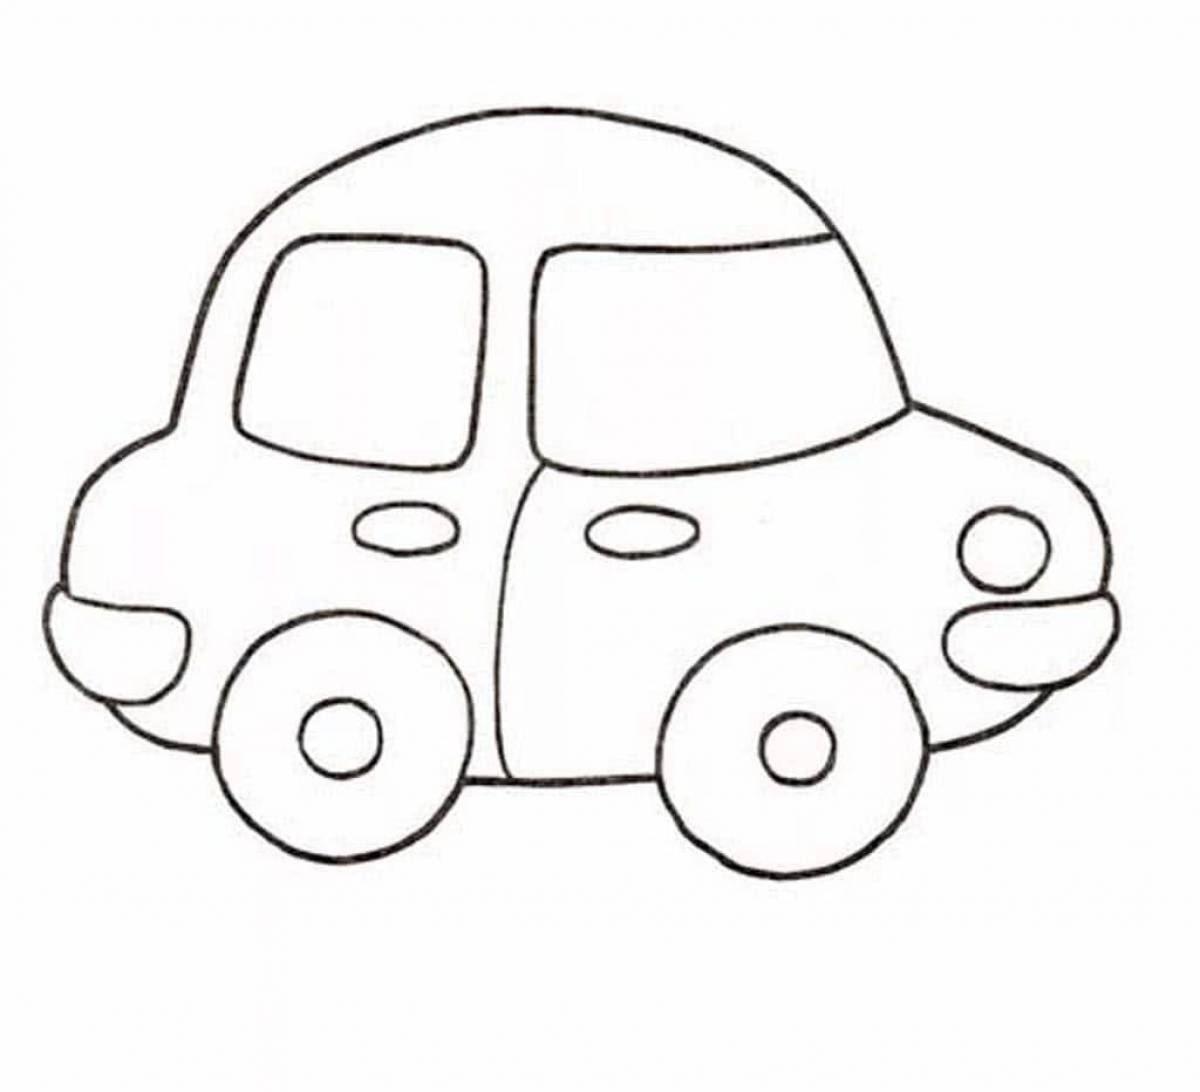 Coloring for children's car with colored splashes